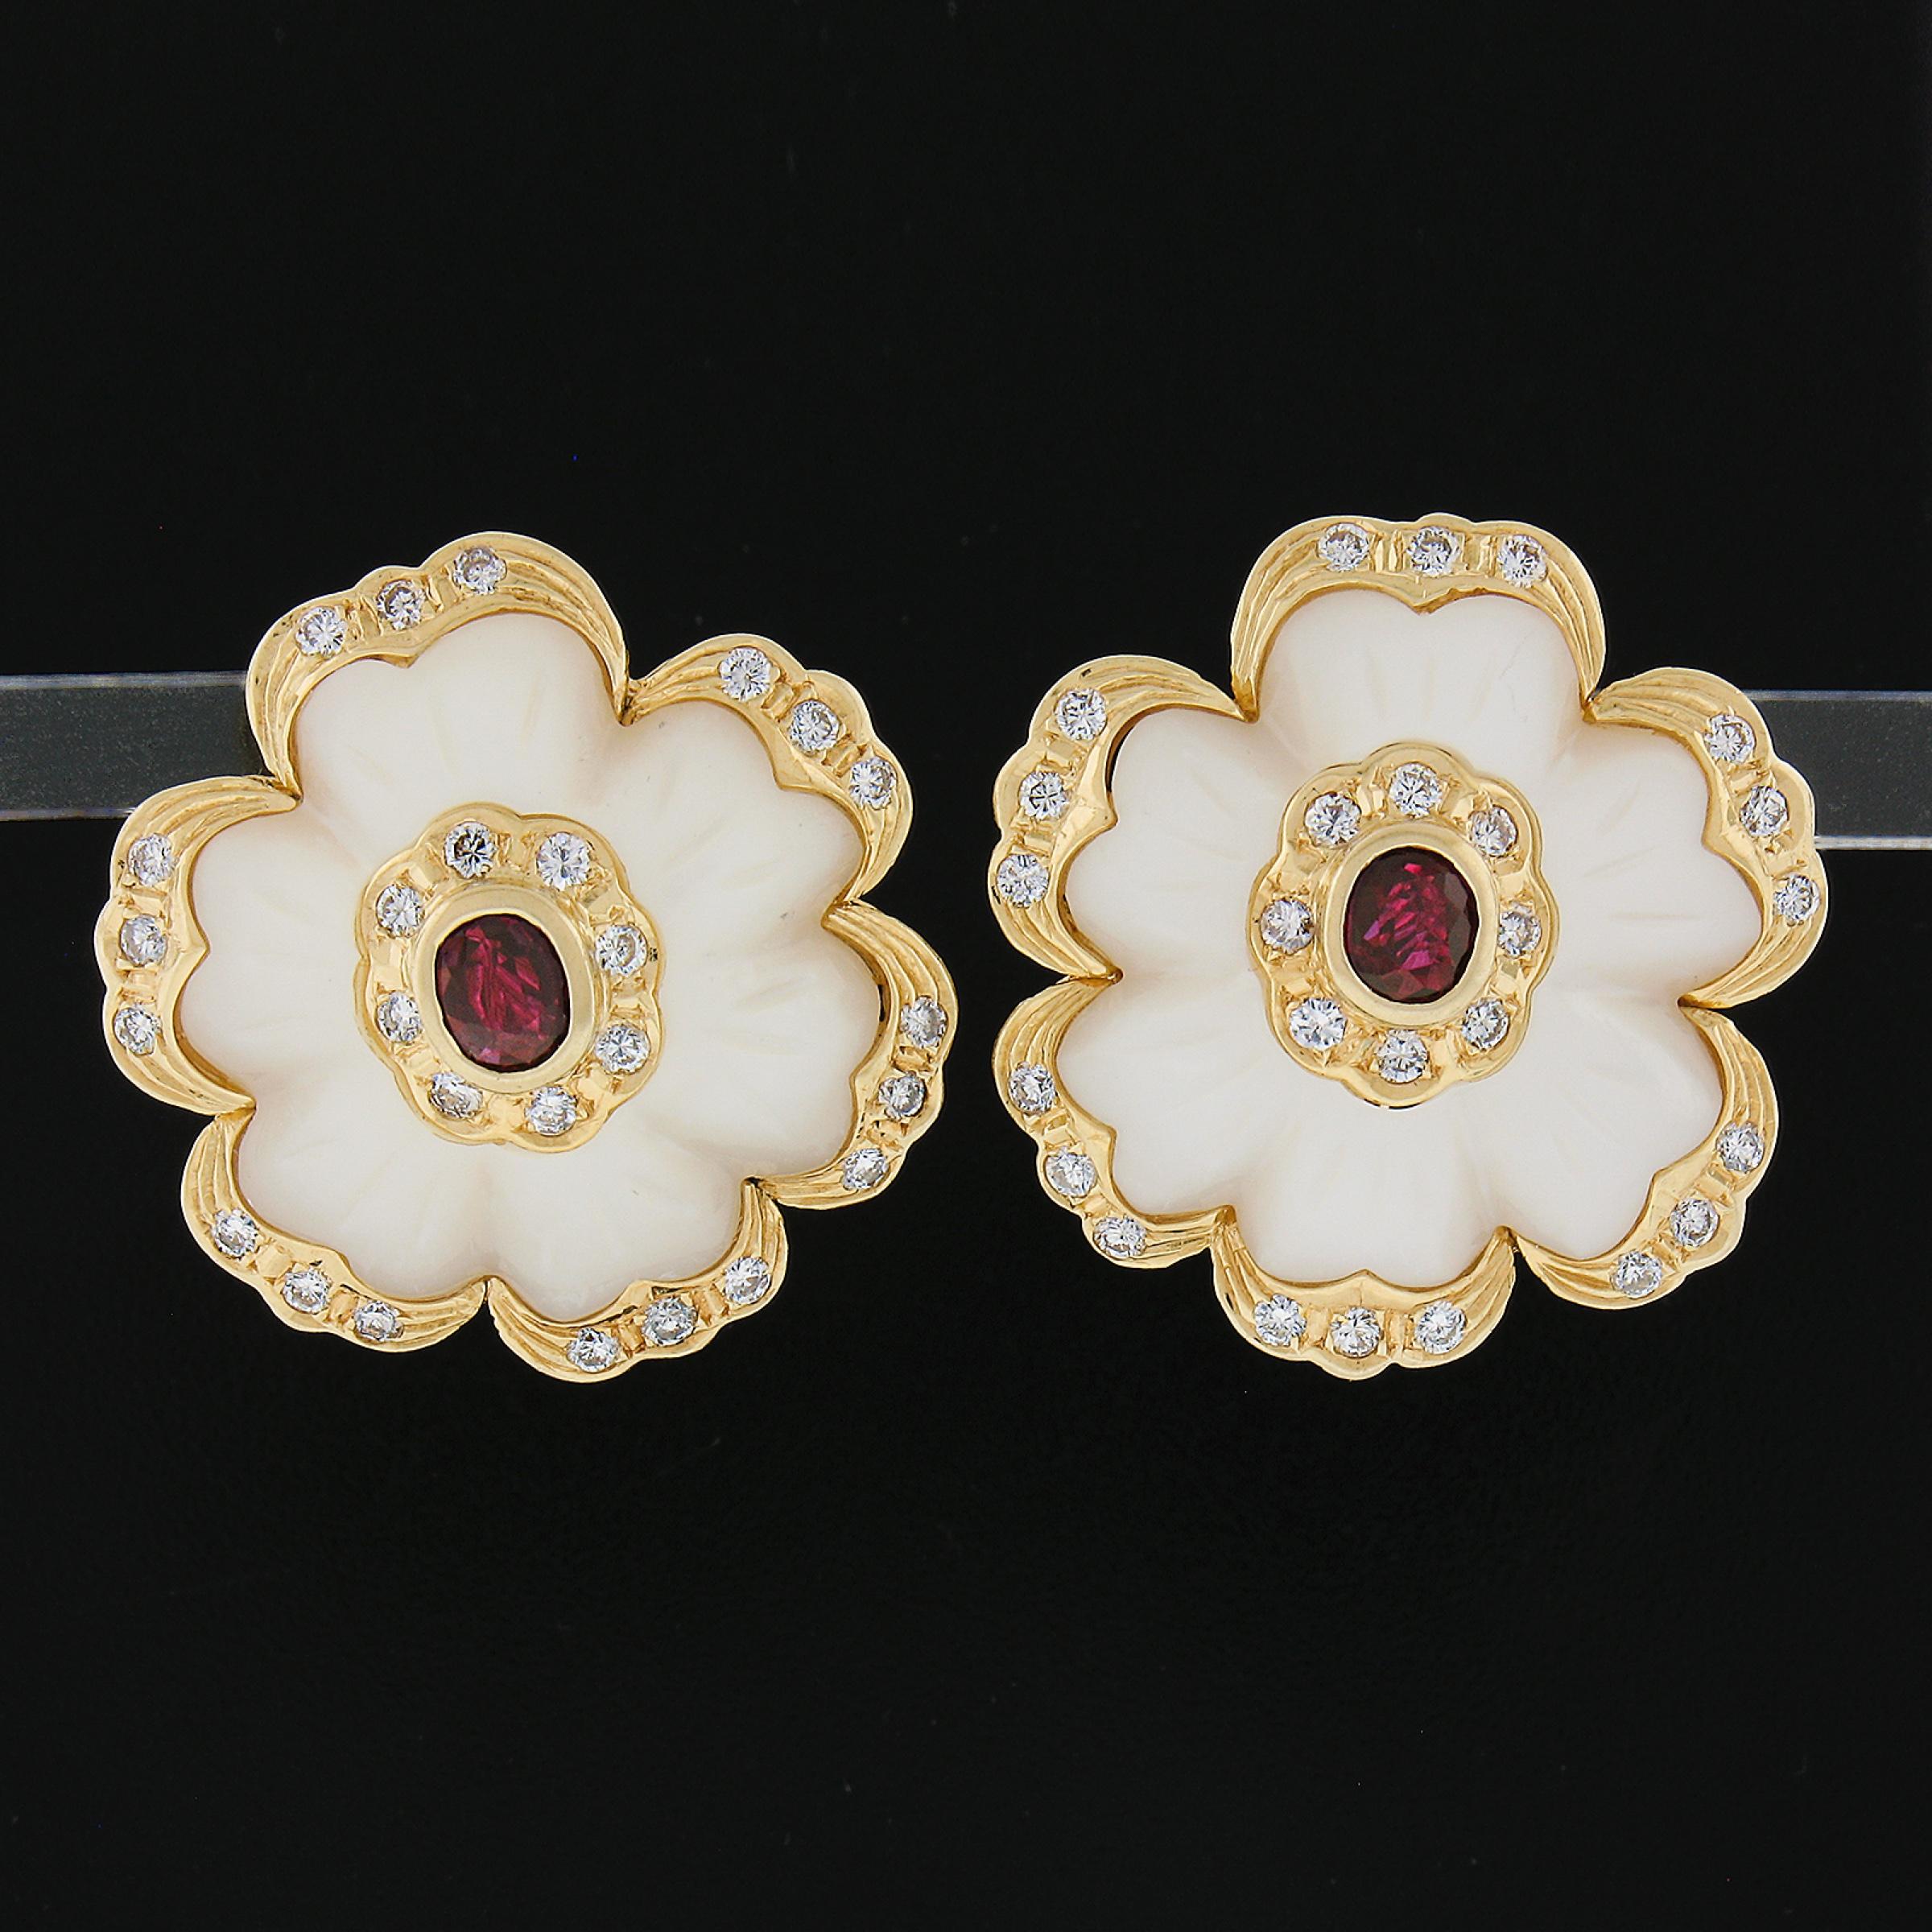 --Stone(s):--
(2) Genuine Mother Of Pearls - Carved Flower Shape - Bezel Set - Creamy White Color w/ Pink & Green Overtone -  21.7x20.1mm each (approx.)
(2) Natural Genuine Rubies - Oval Cut - Bezel Set - Deep Red Color - 5x4mm - 1.0ctw